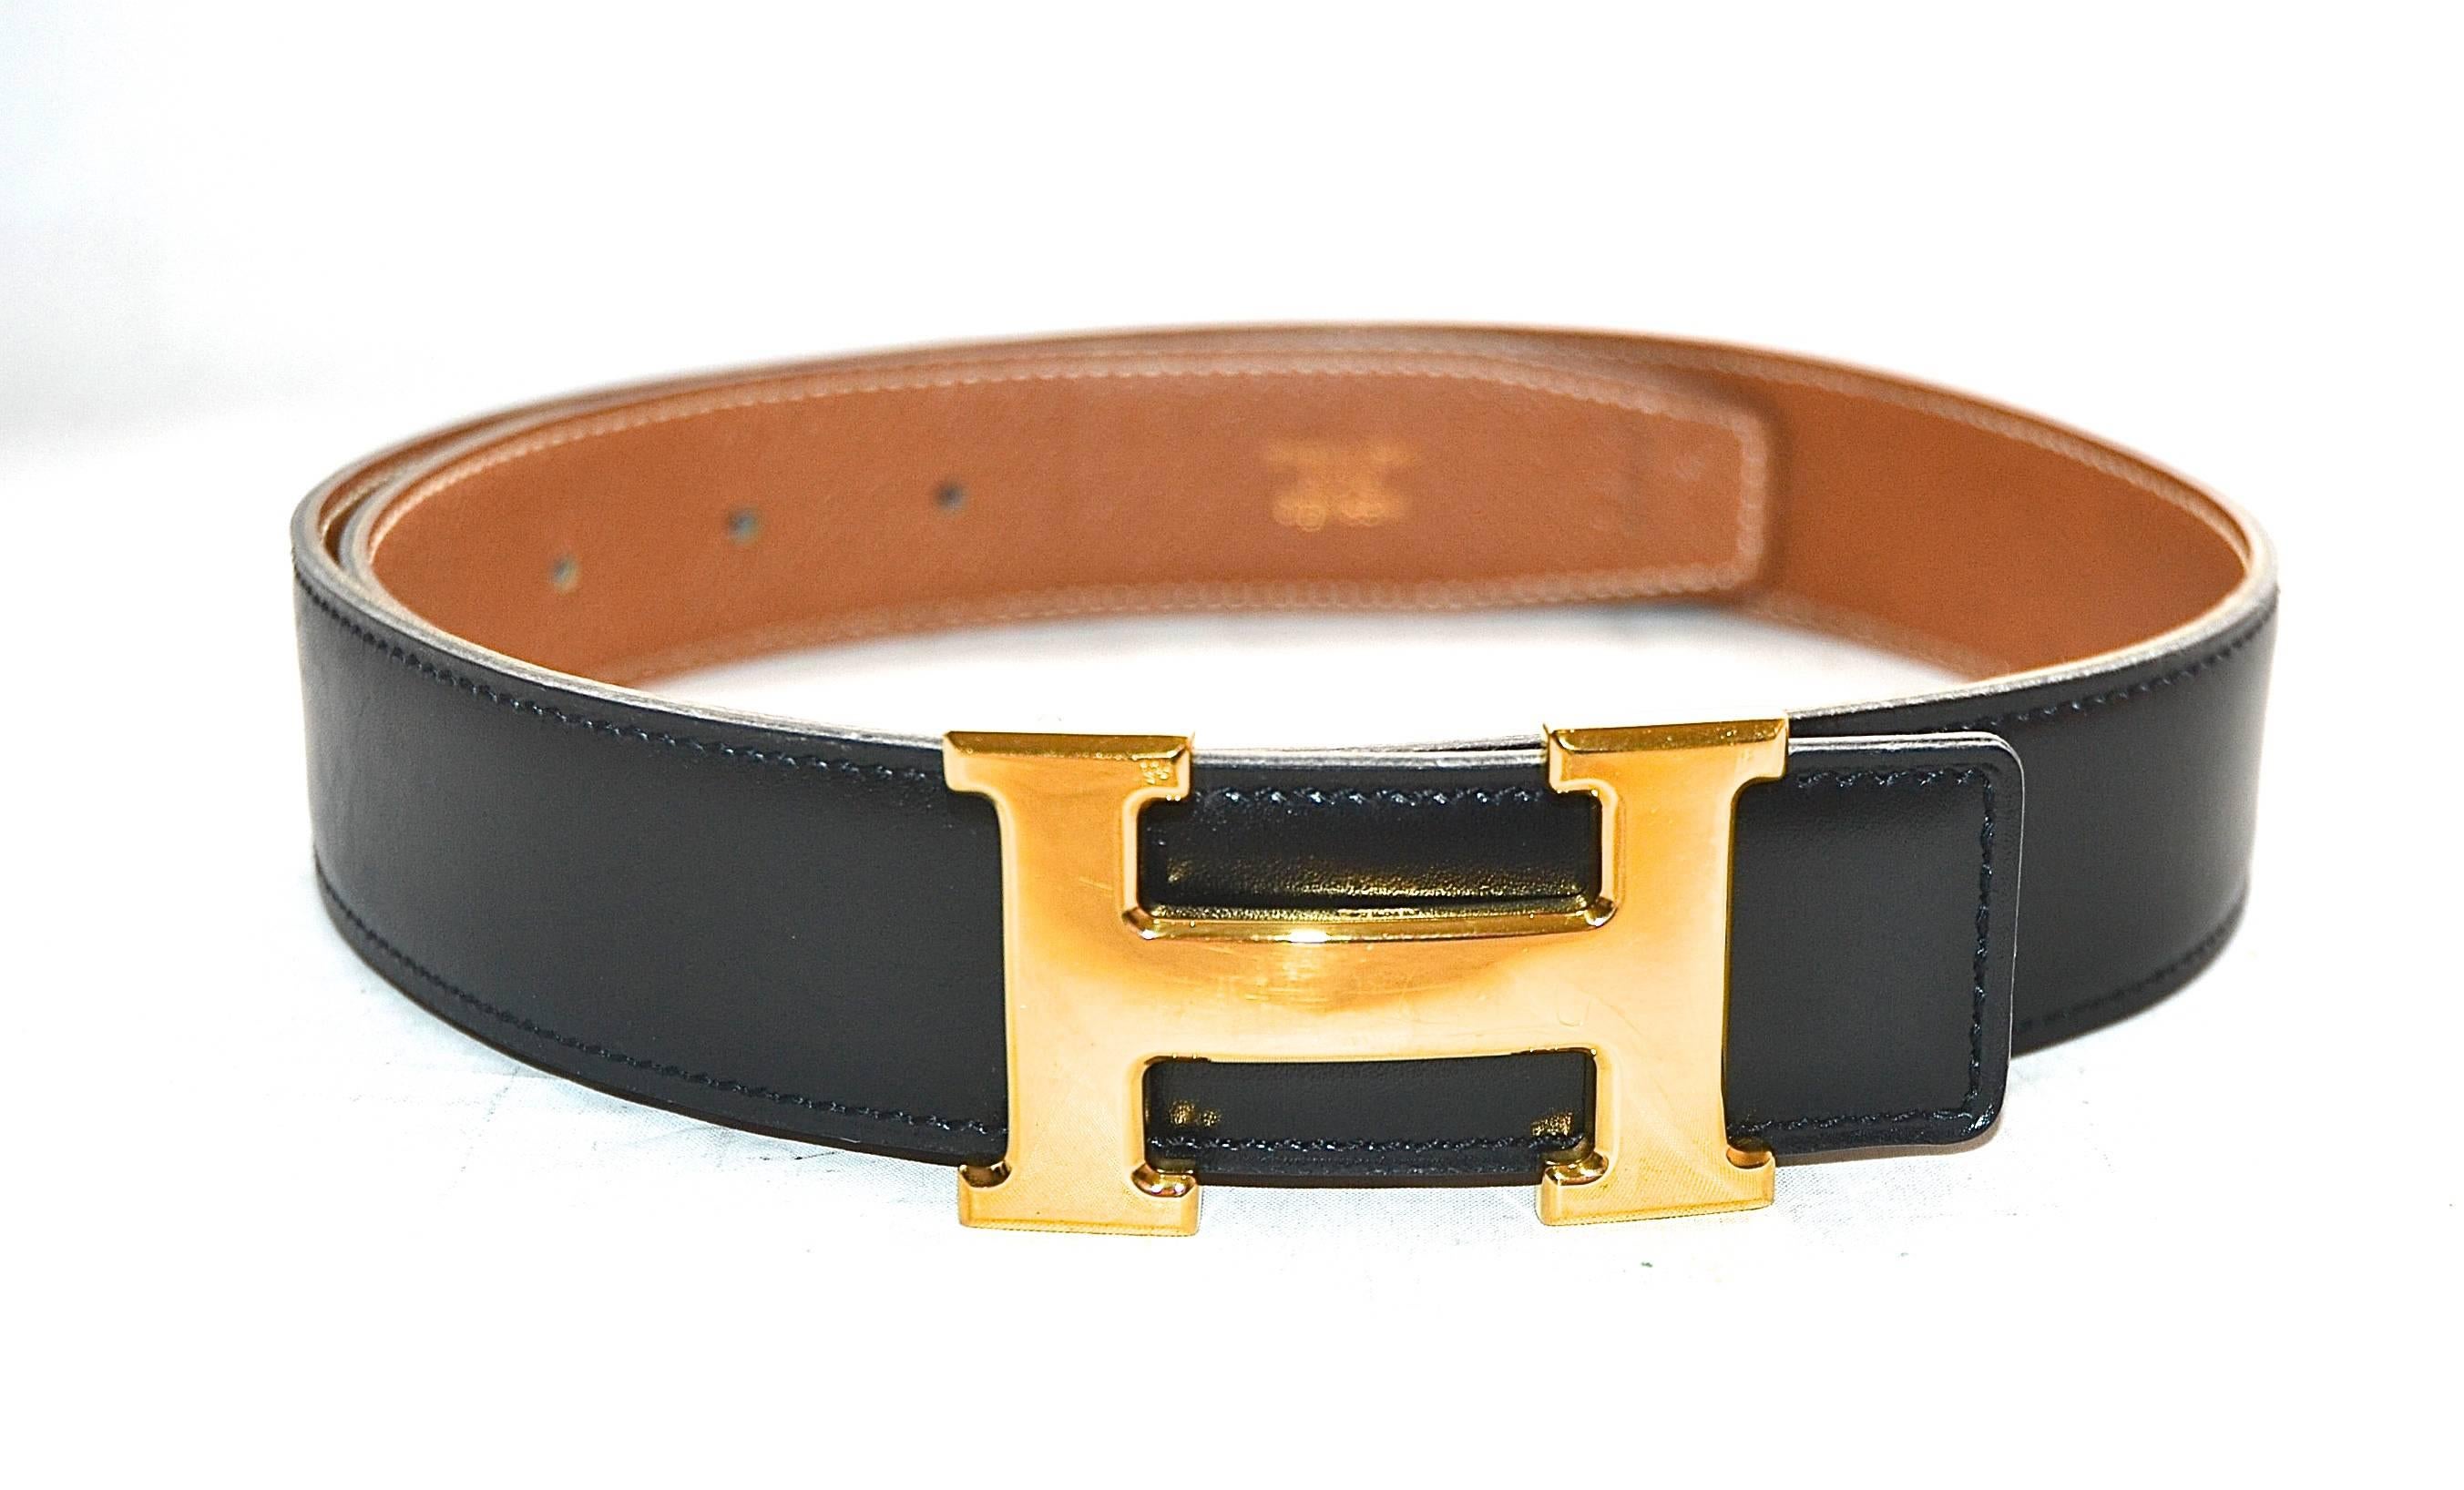 Authentic Hermes Gold H Belt.

Reversible, Black Calf exterior, Brown Constance Interior

Size 75cm / 30inch. Width: 1.3inch. Buckle width 2.4inch, Height 1.6inch

90cm in total, 75cm to belt holes.

Good to Very Good Condition. Minor stains on the